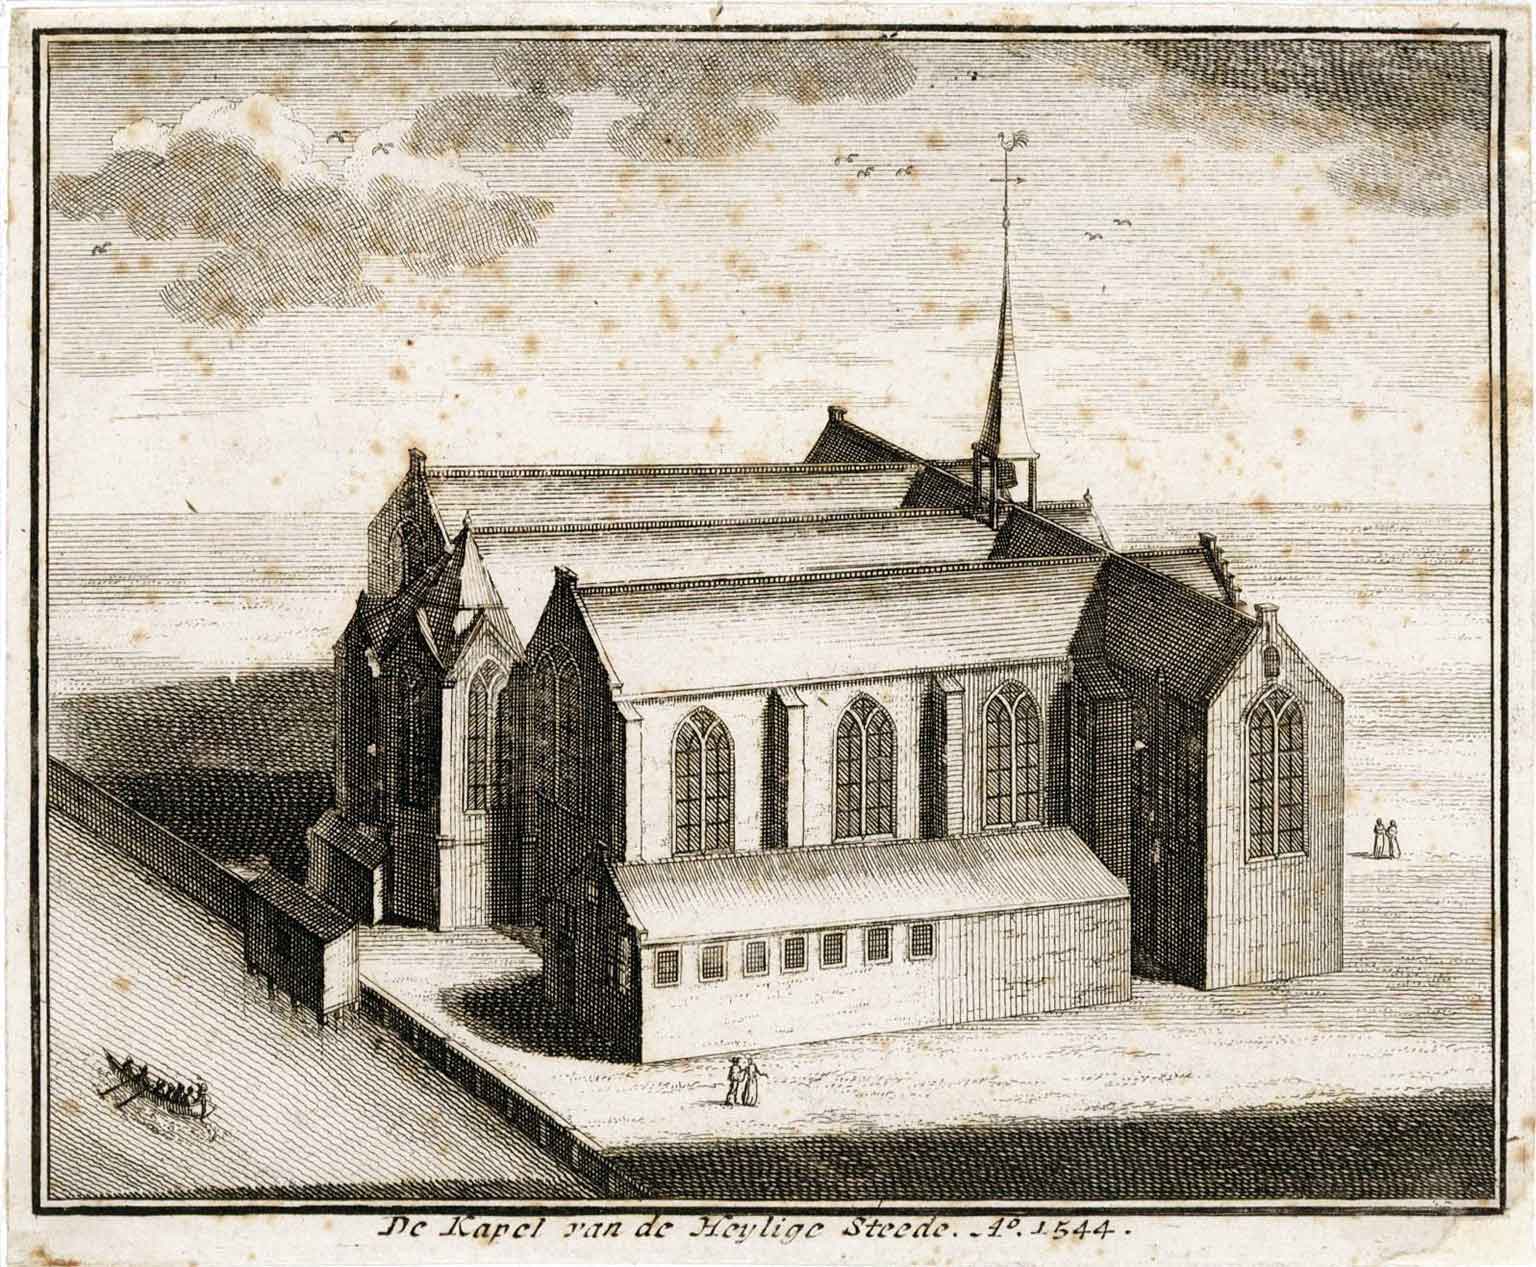 Engraving of the Chapel of the Holy Stead in 1544, Rokin, Amsterdam